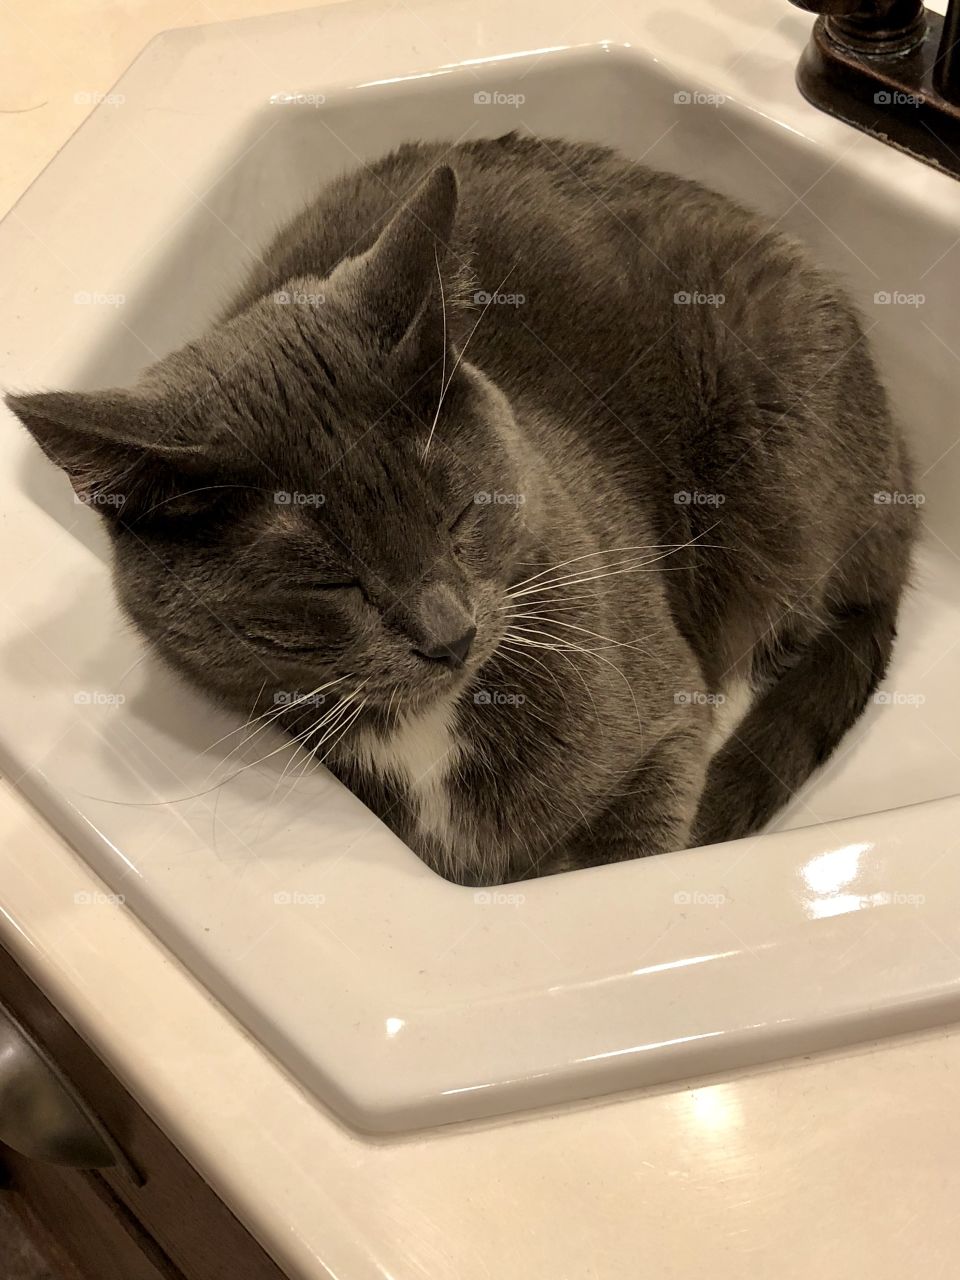 Sink for a bed